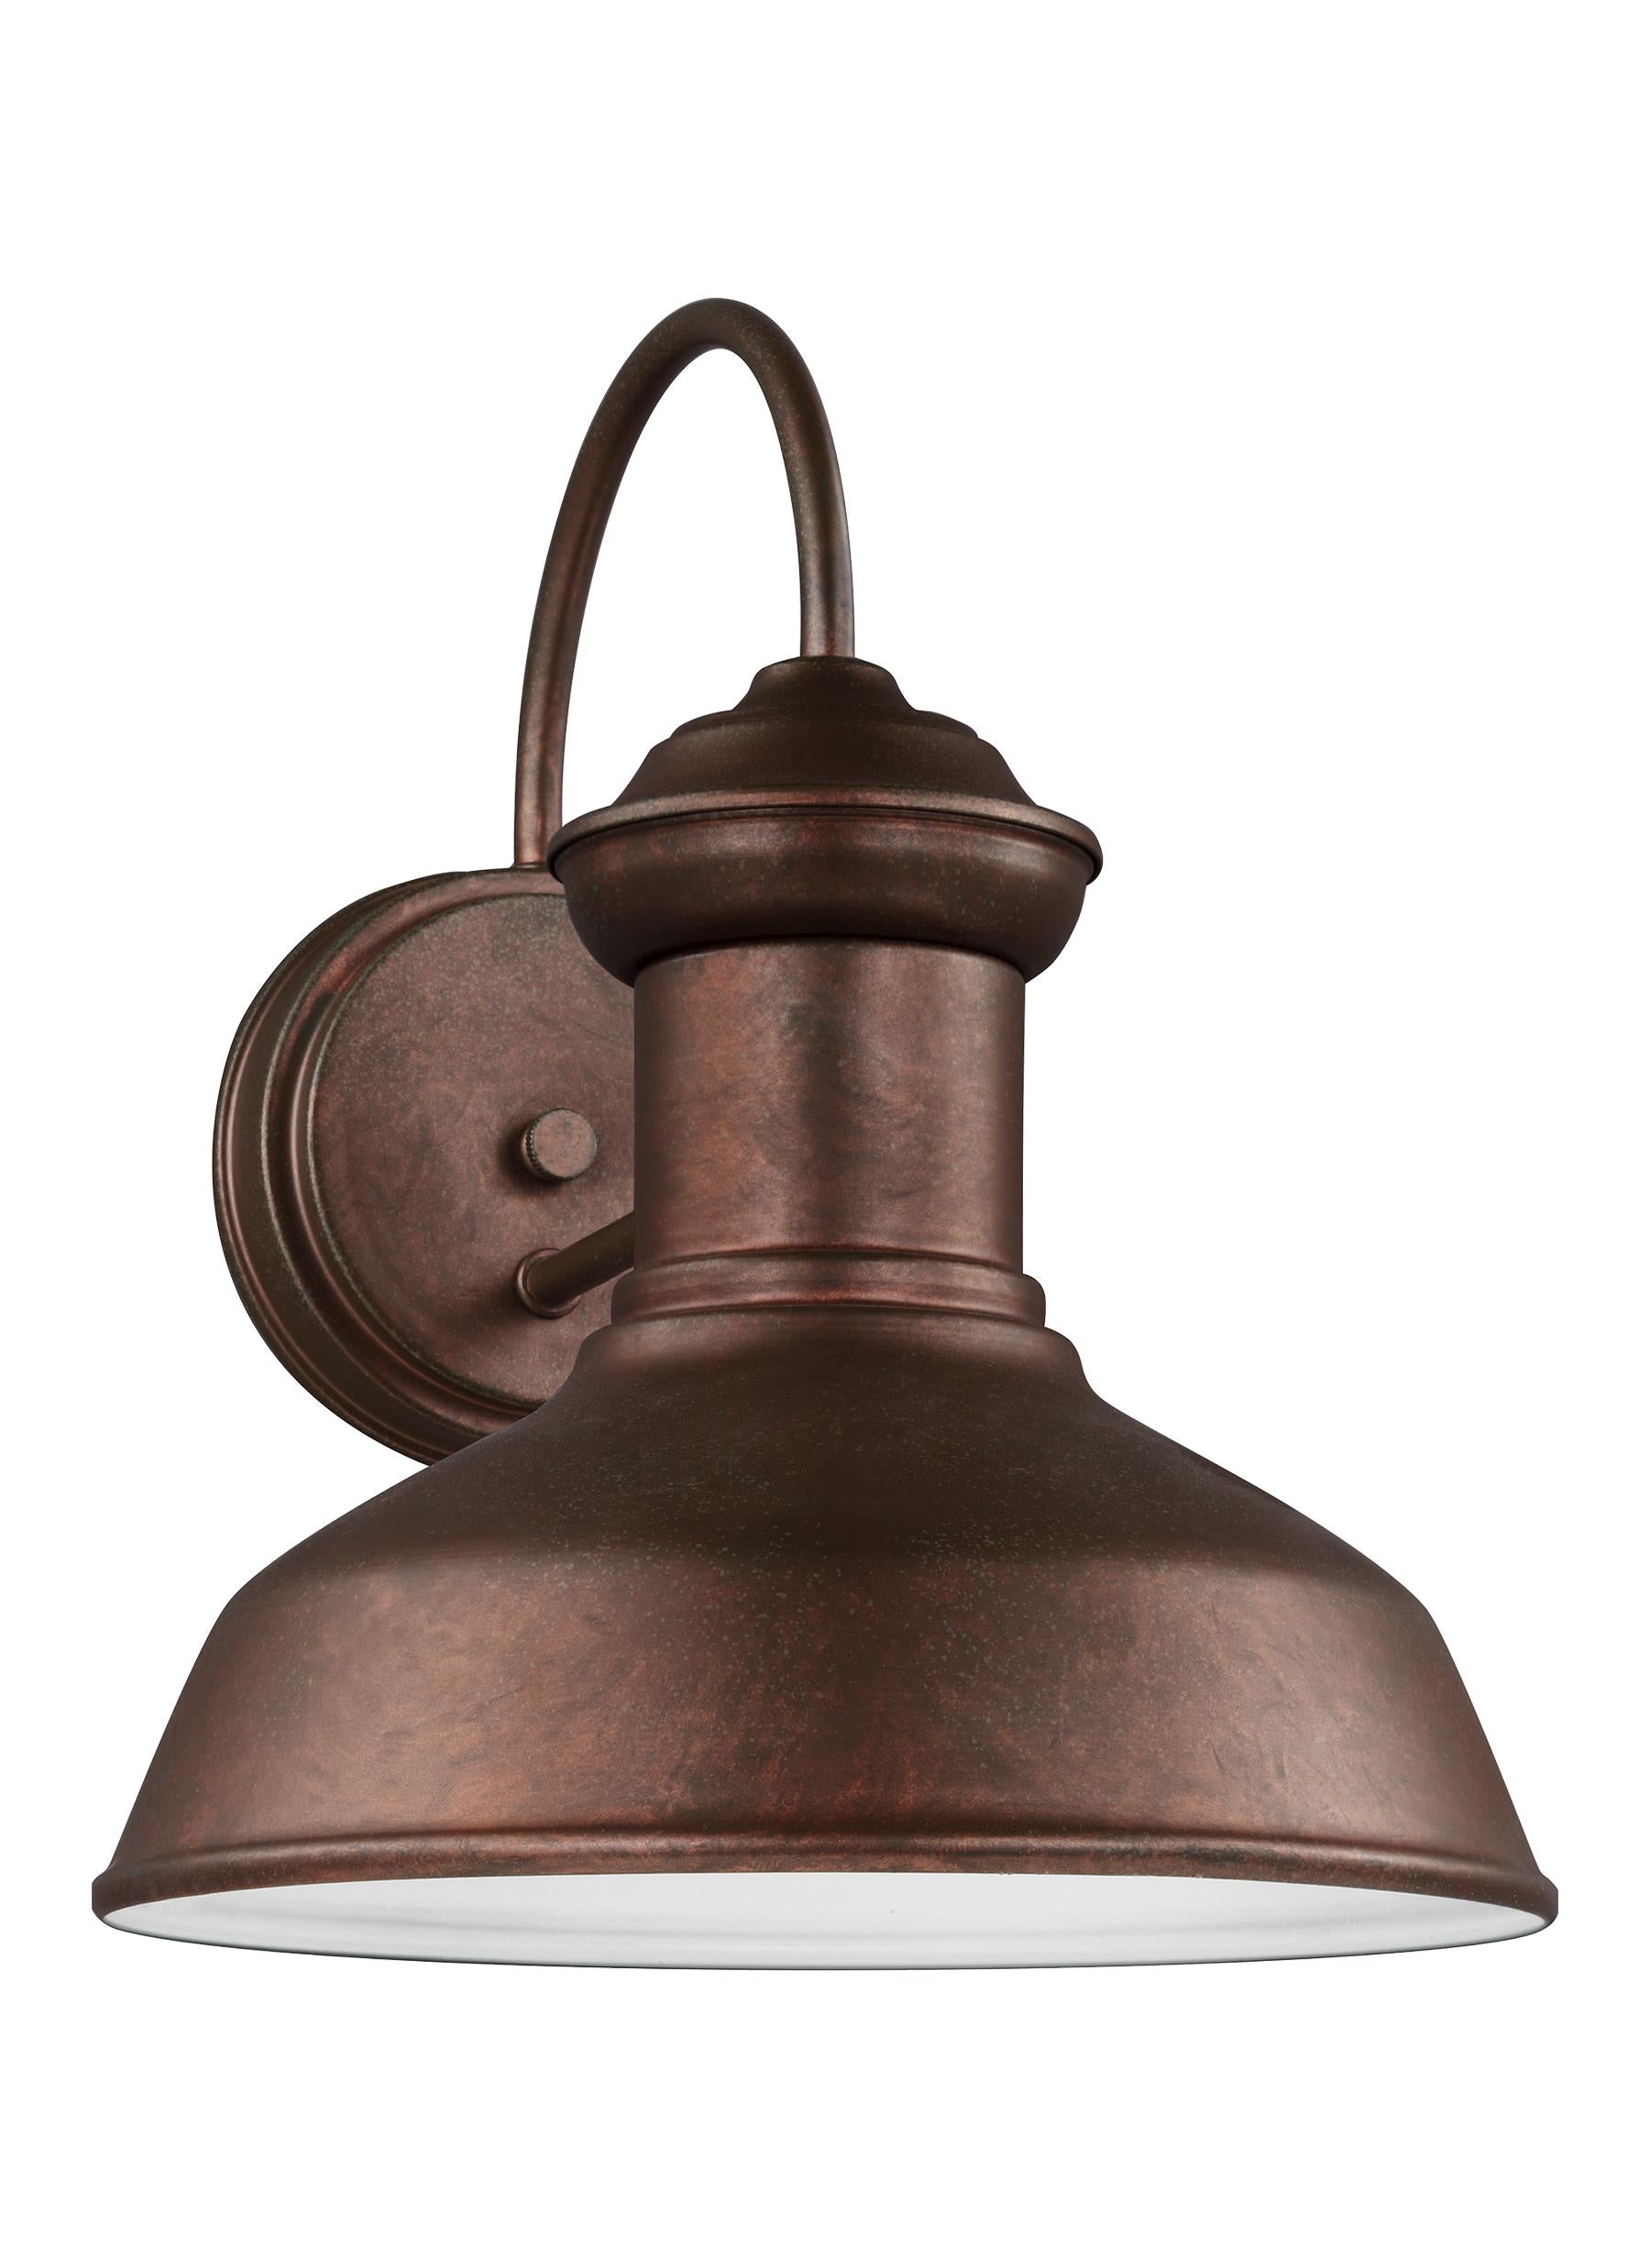 Fredricksburg traditional 1-light outdoor exterior Dark Sky compliant small wall lantern sconce in weathered copper finish